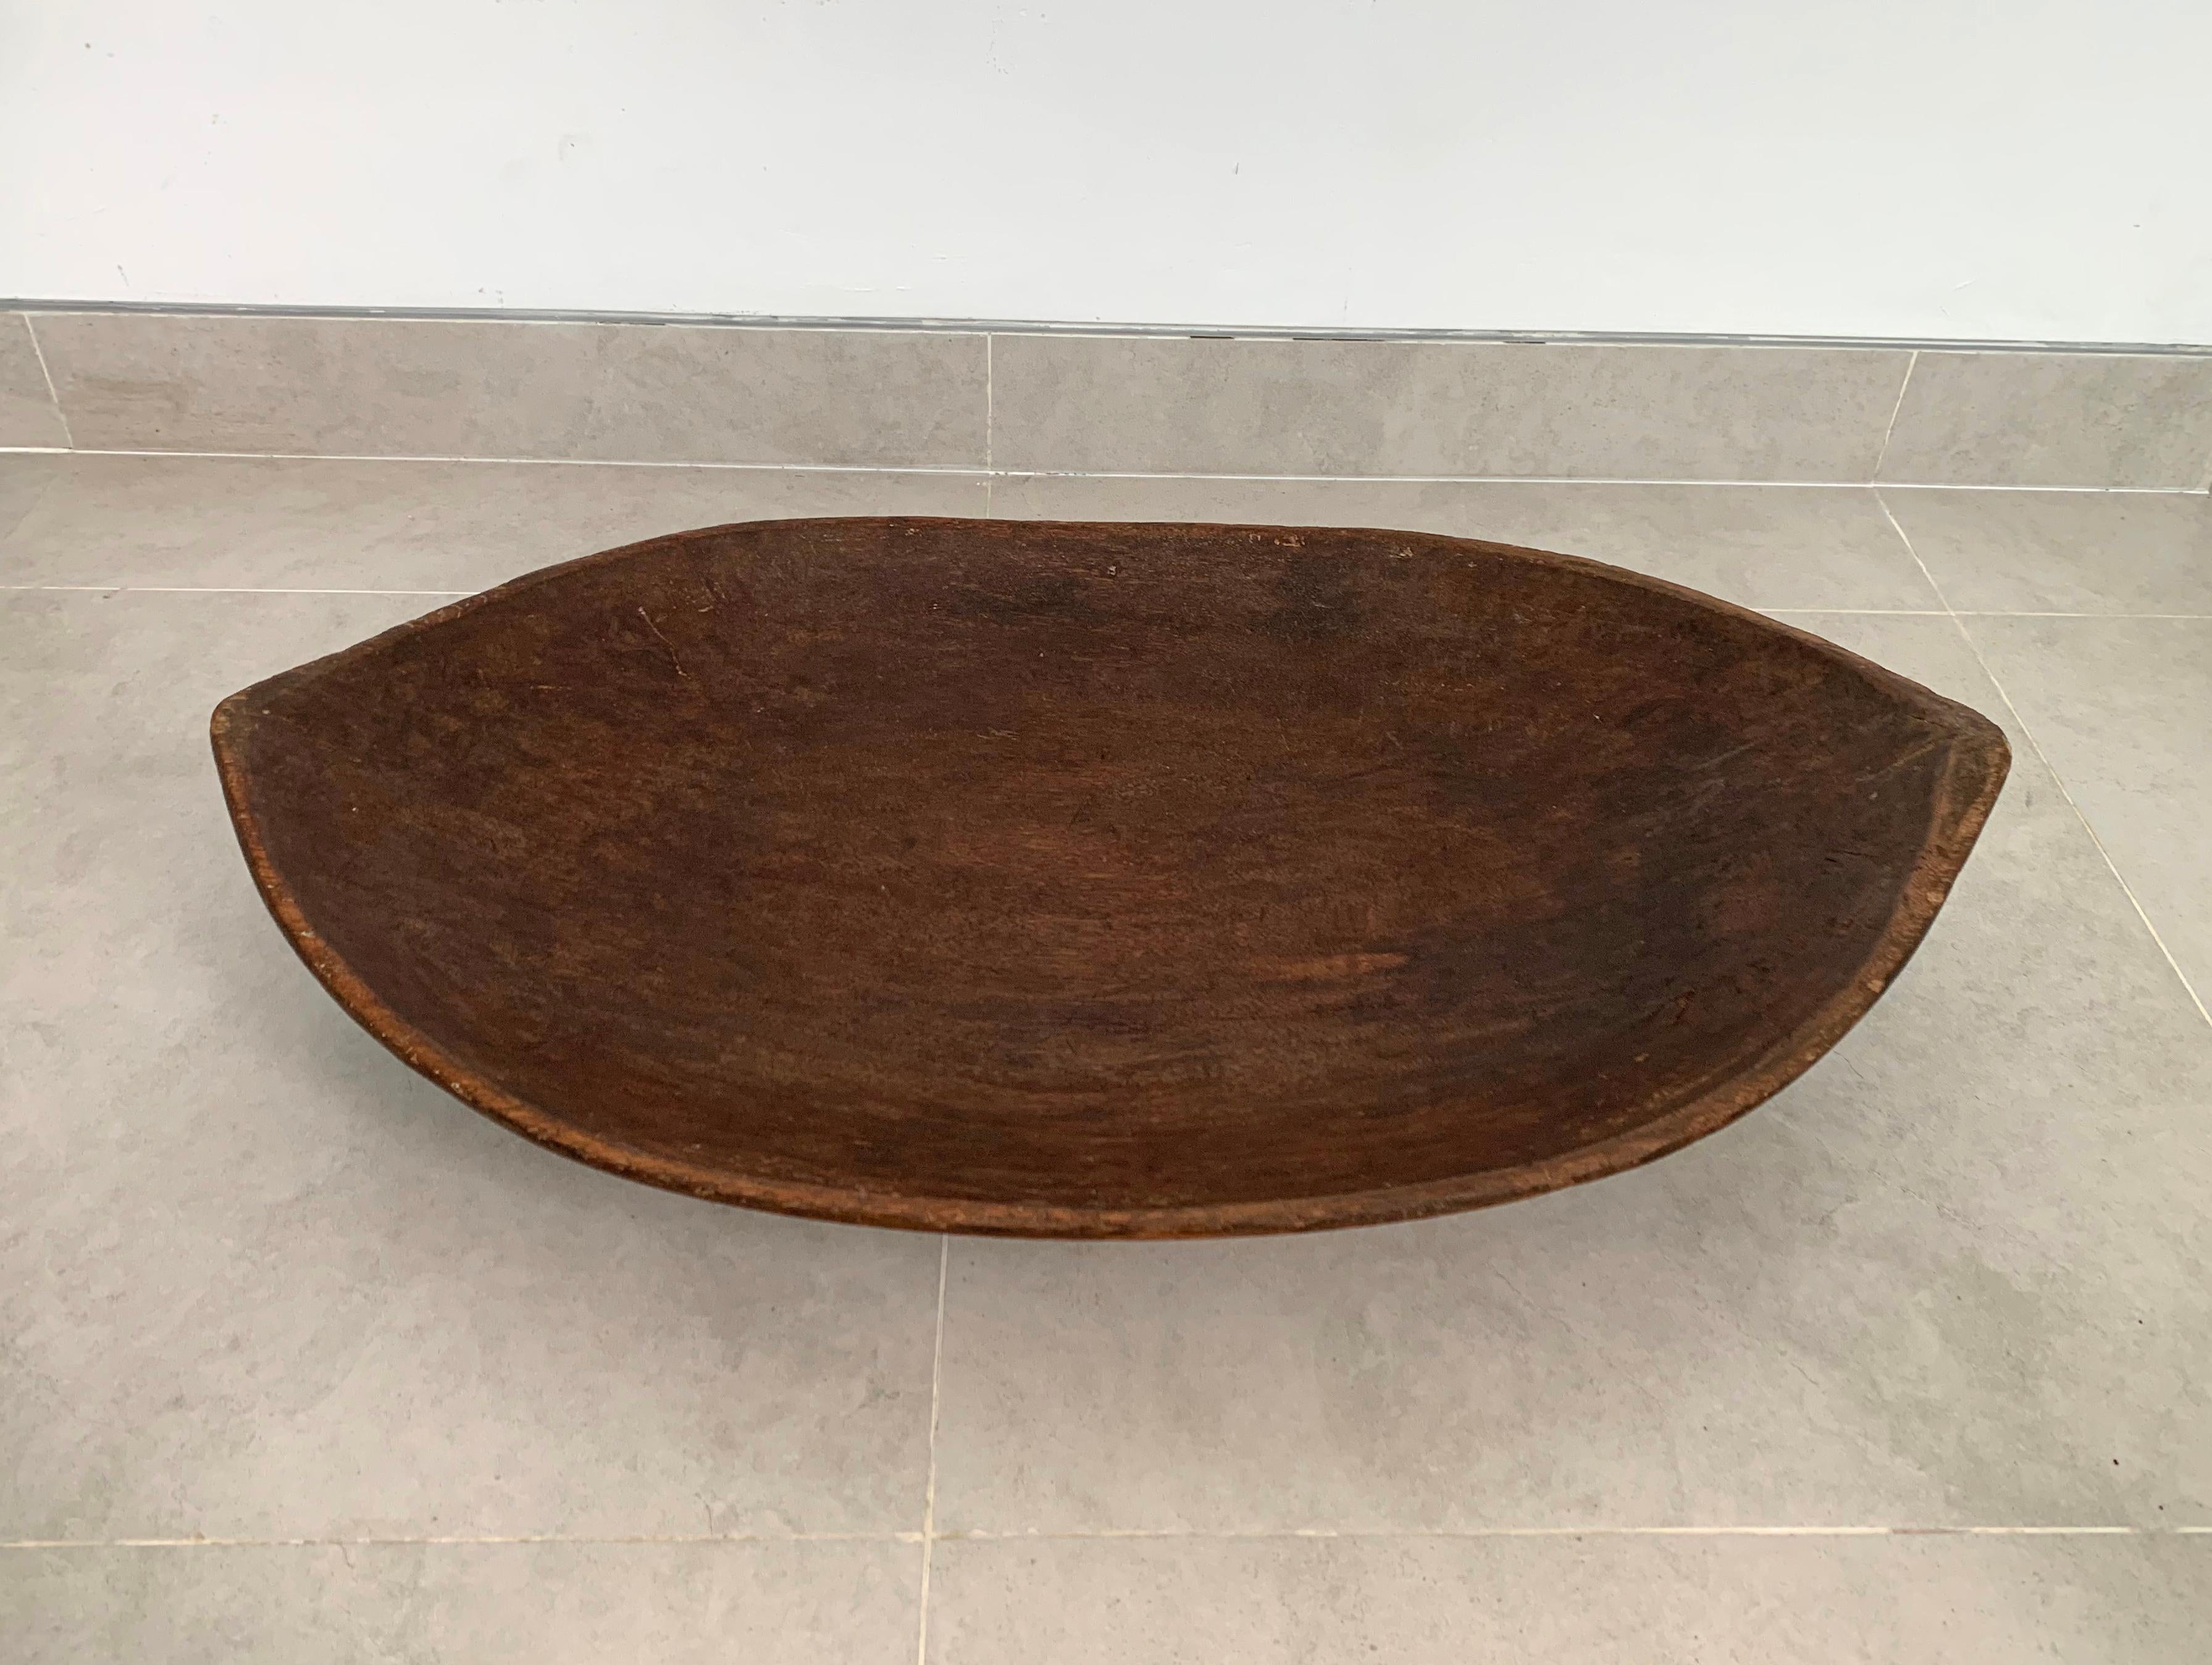 Indonesian Hand-Carved Wooden Tray / Bowl Mentawai Tribe of Indonesia, Mid-20th Century 